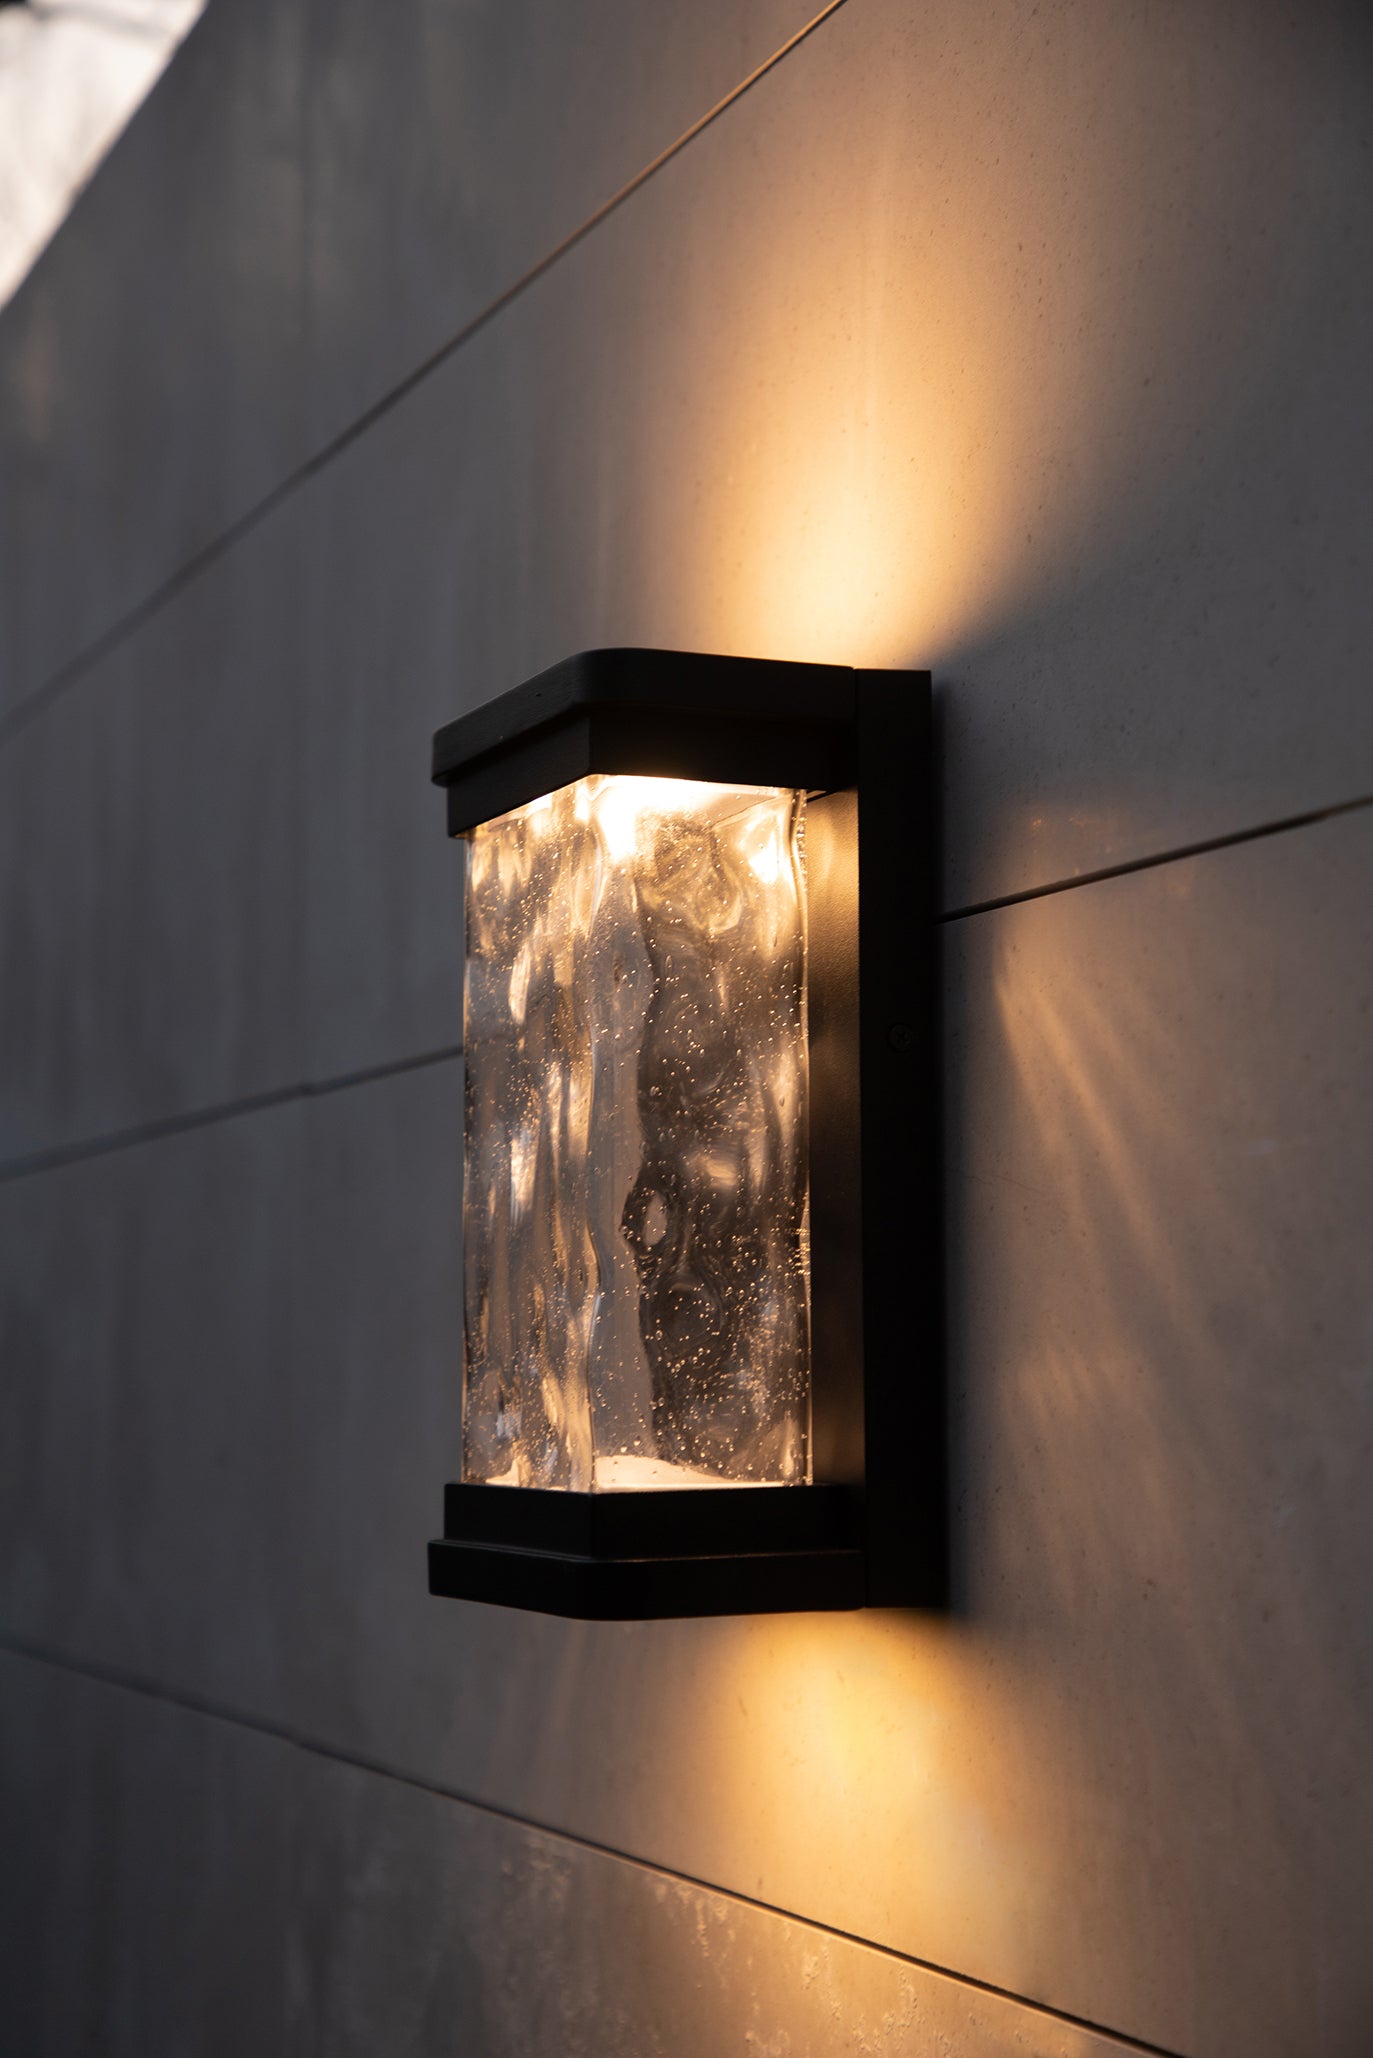 LUTEC-STARRY LED Outdoor Wall Sconce With Seeded Glass Surround, Dusk To Dawn, 15W,1000LM, 3000K